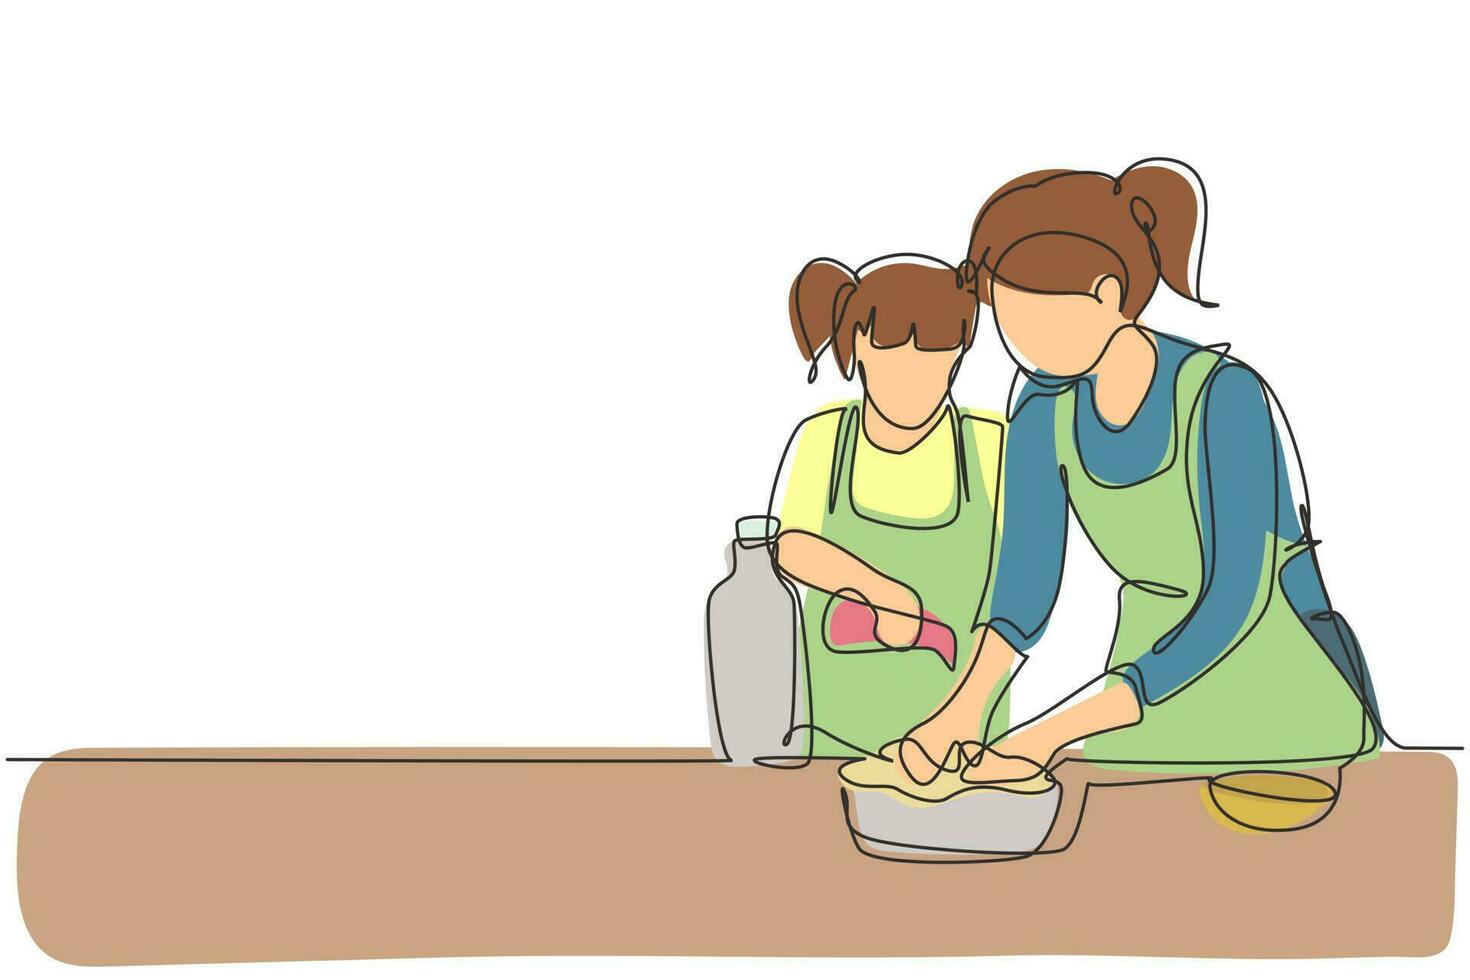 Single one line drawing cute little daughter helping her mother make dough by adding olive oil. Pastry preparation in cozy kitchen at home. Continuous line draw design graphic vector illustration